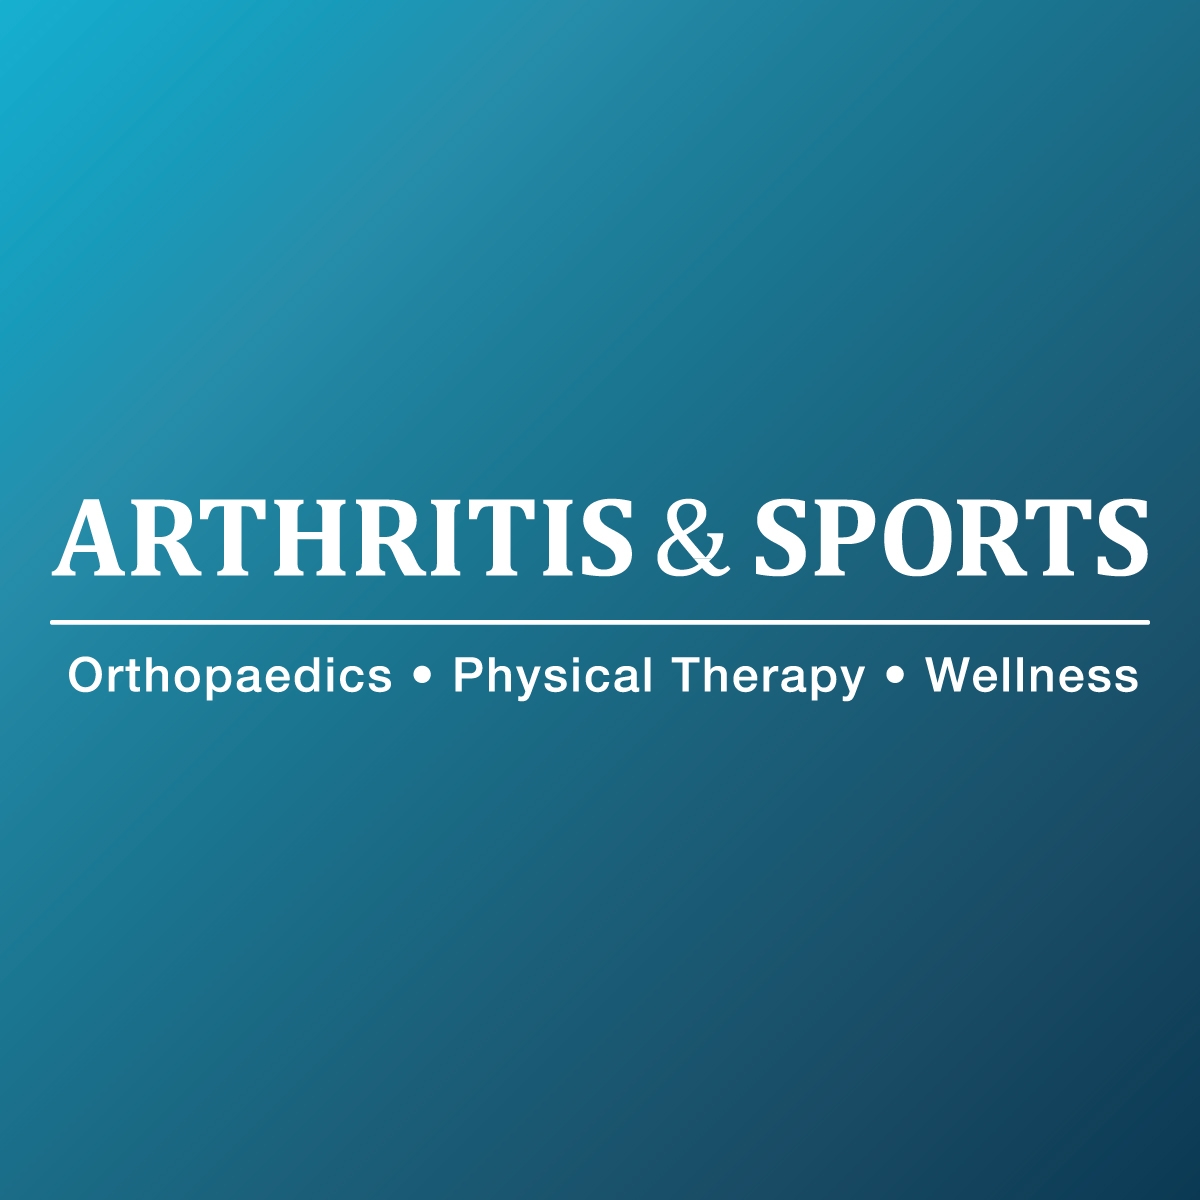 Arthritis & Sports Outlines Why It is the Go-to Orthopedic and Physical Therapy Clinic